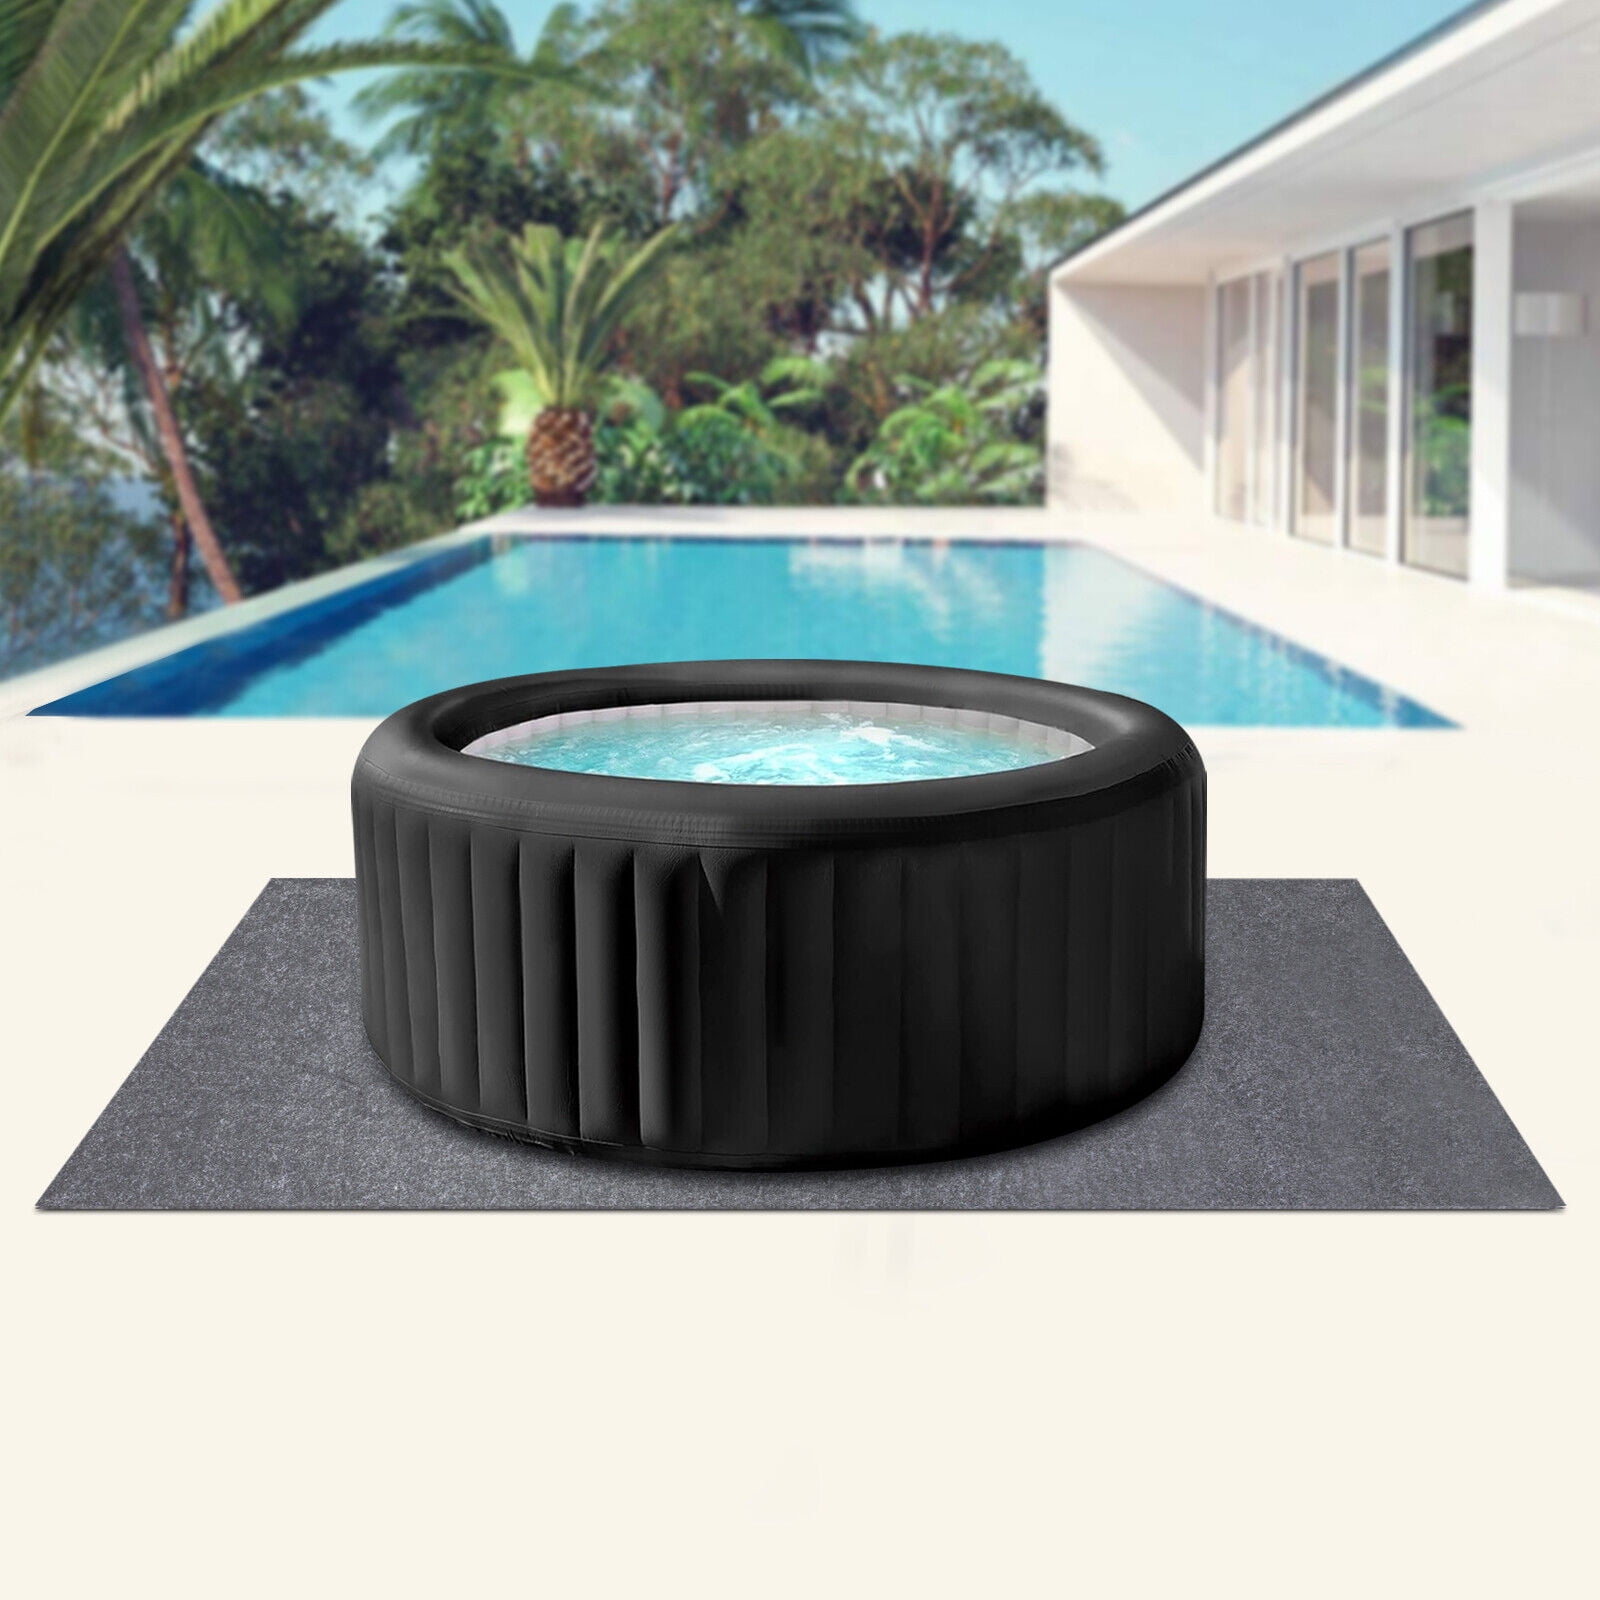 Hot Tub Pad for Inflatable Hot Tub,Extral Large Ground Mat for Outdoor ...